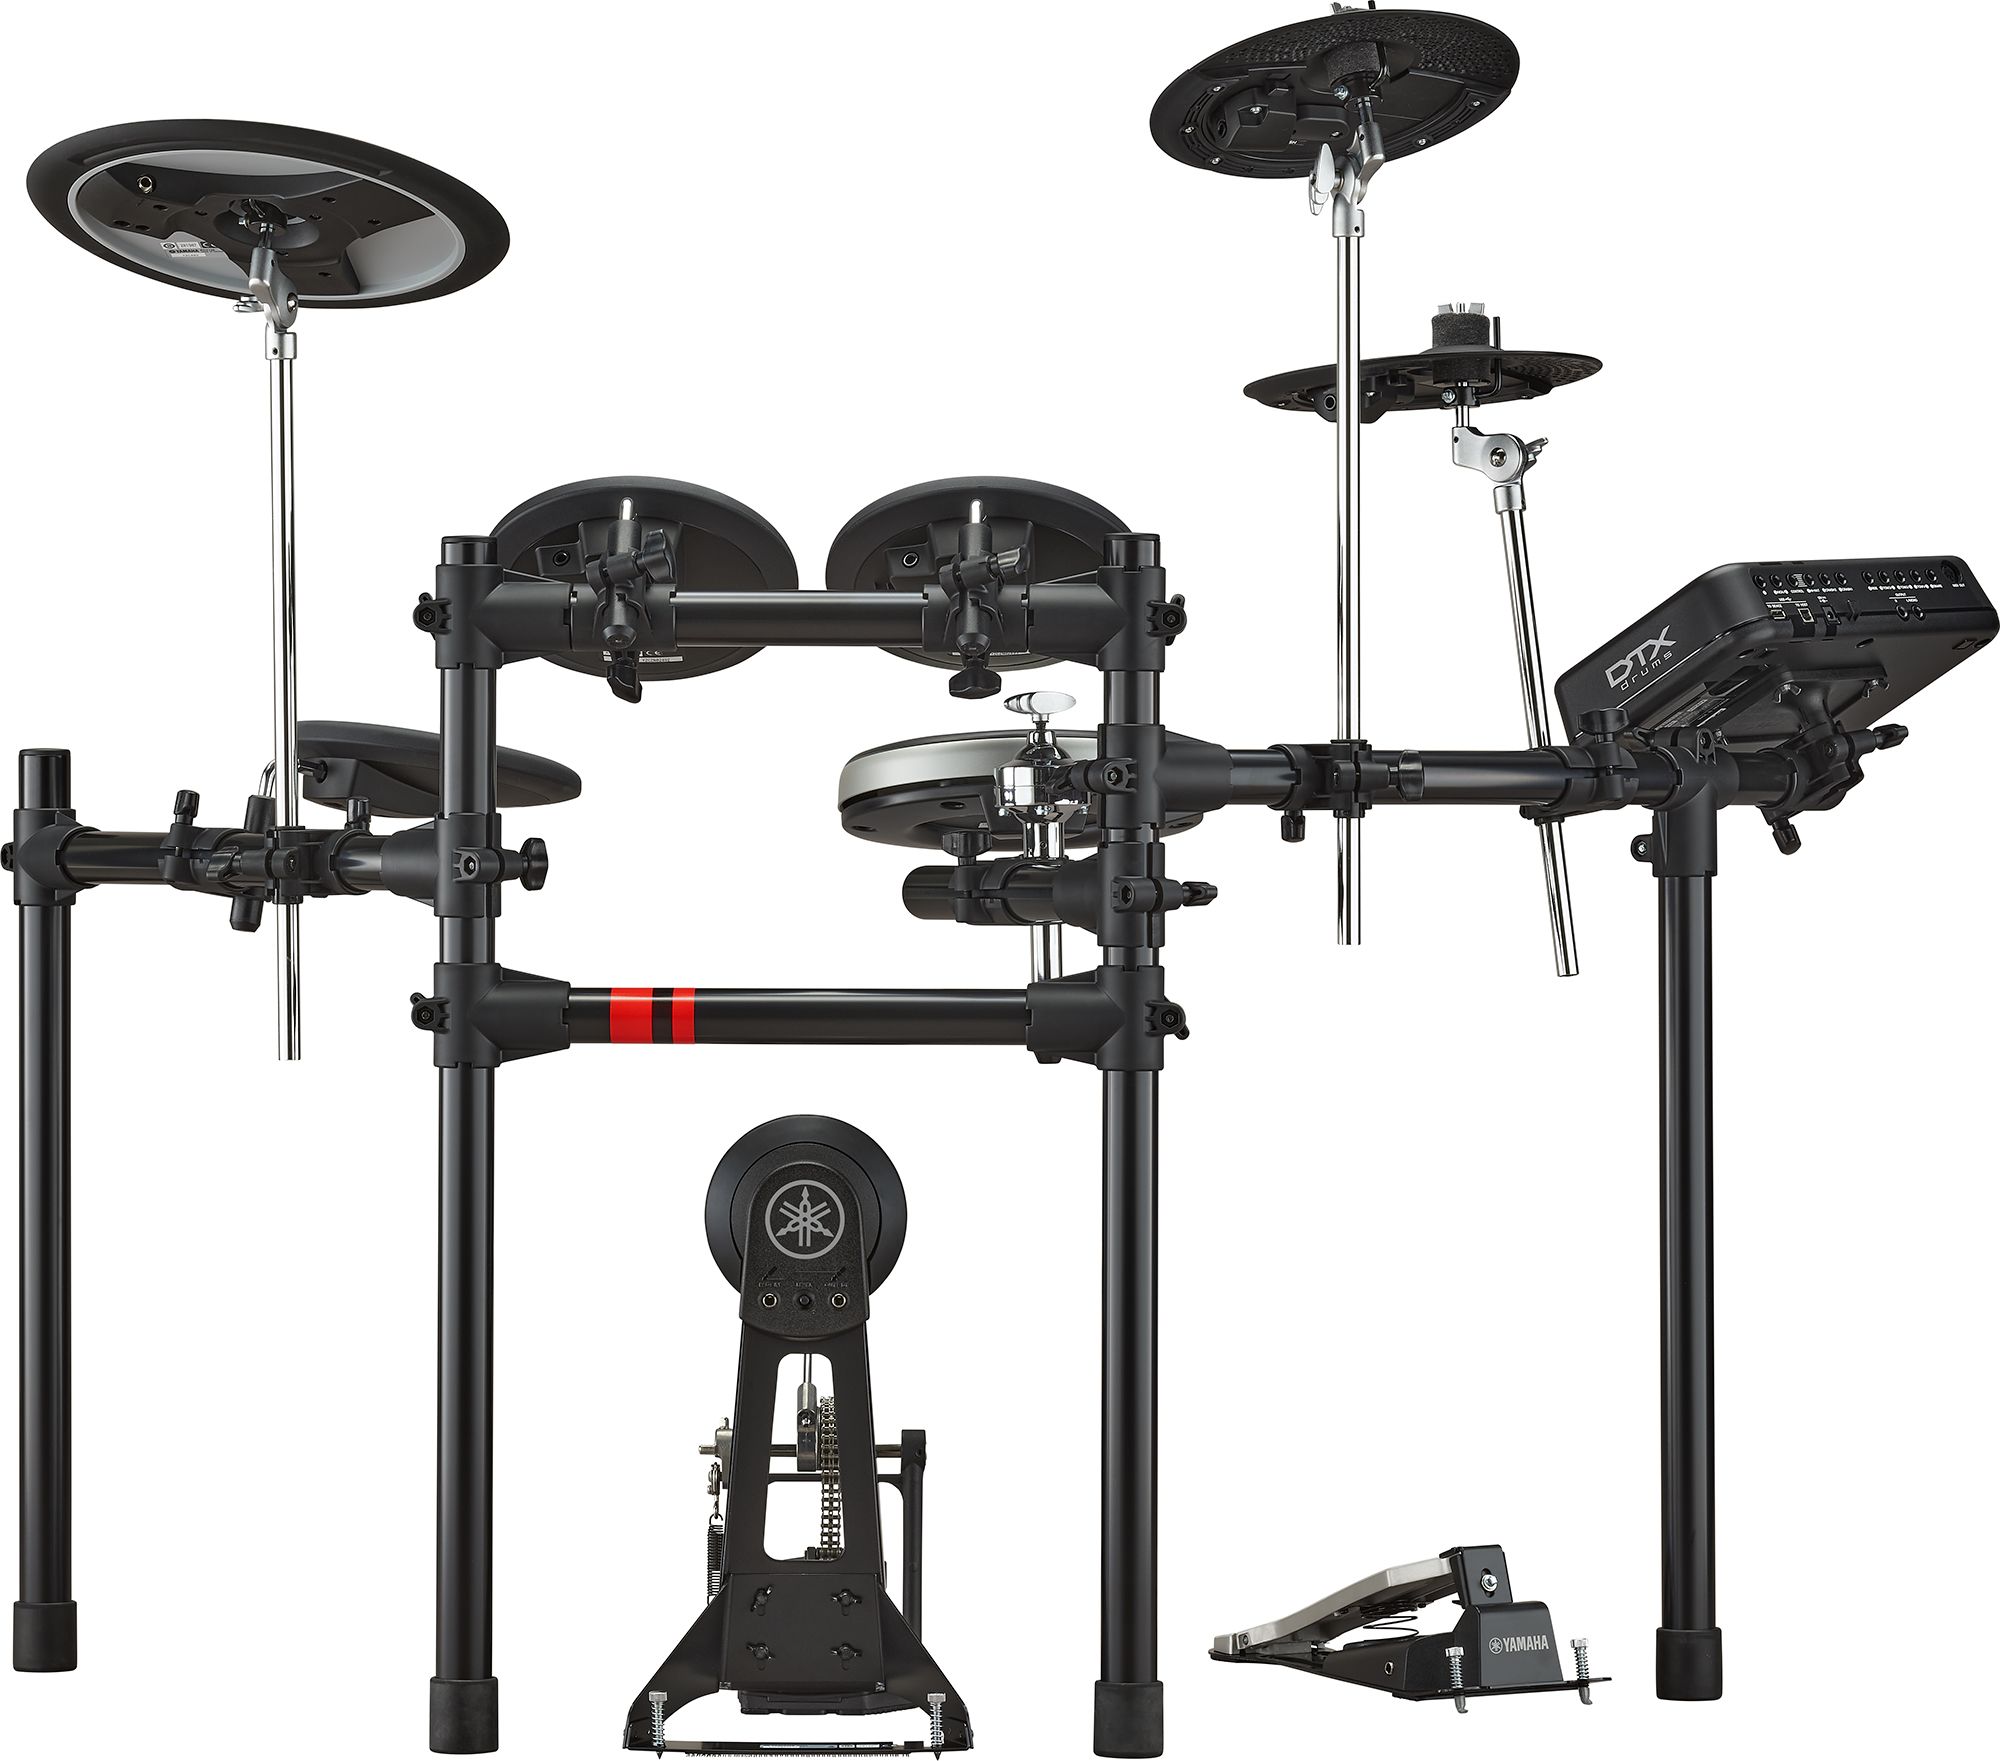 DTX6 Series Electronic Drum Kits Products - Yamaha USA